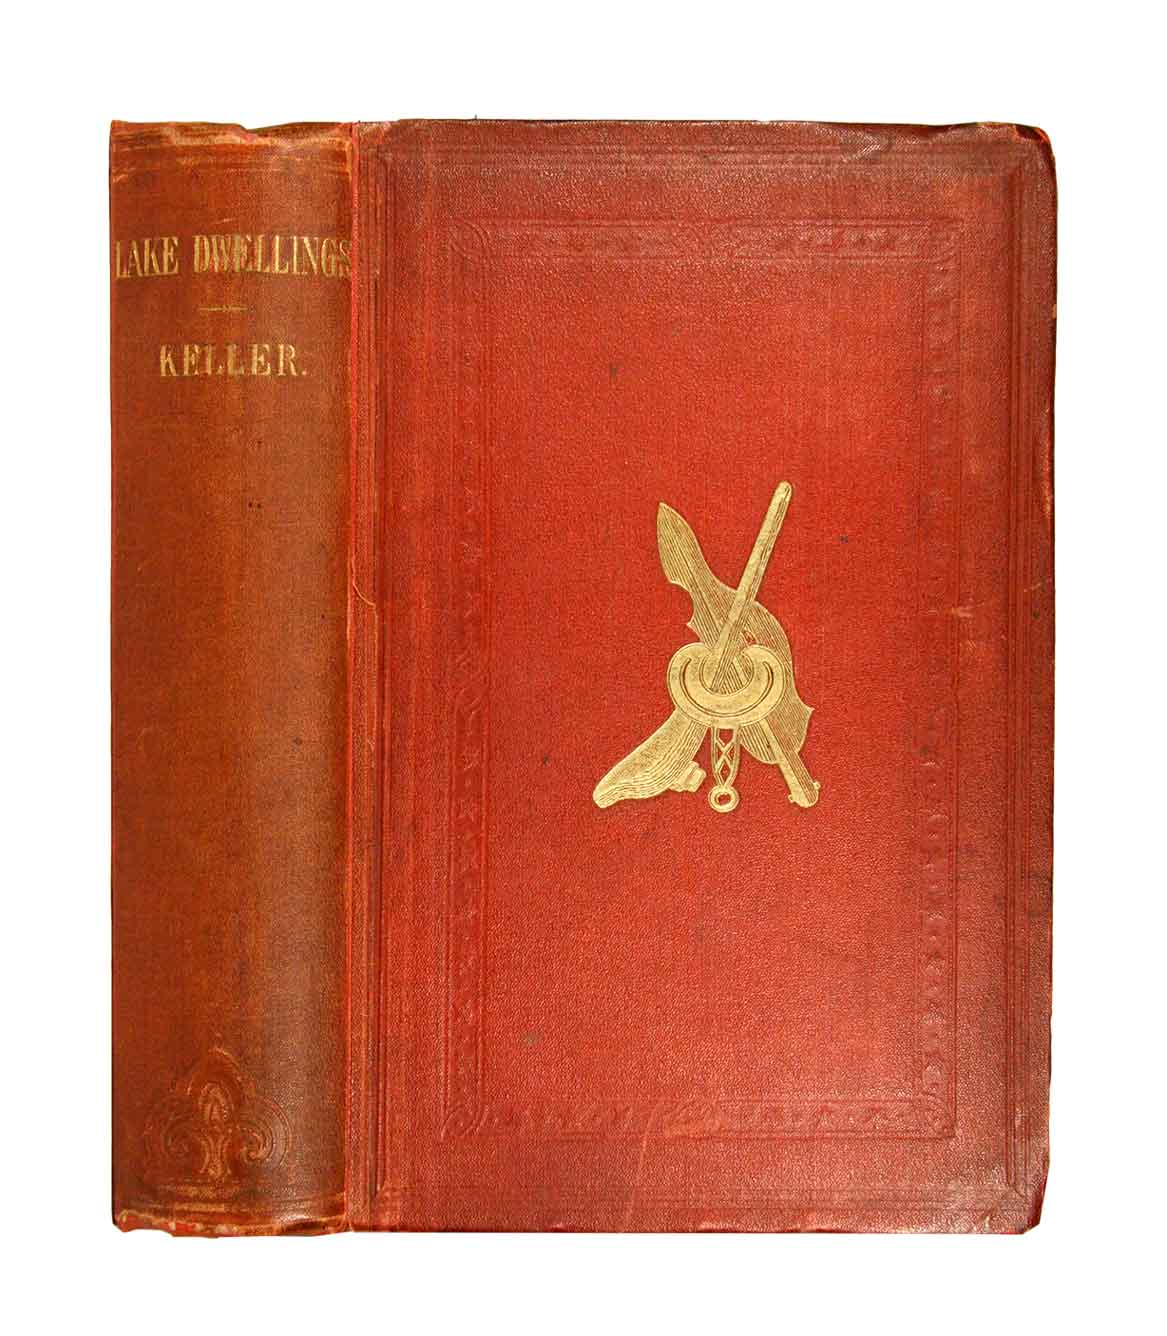 KELLER, Ferdinand: - The Lake dwellings of Switzerland and other parts of Europe. Translated and arranged by John Edward Lee.